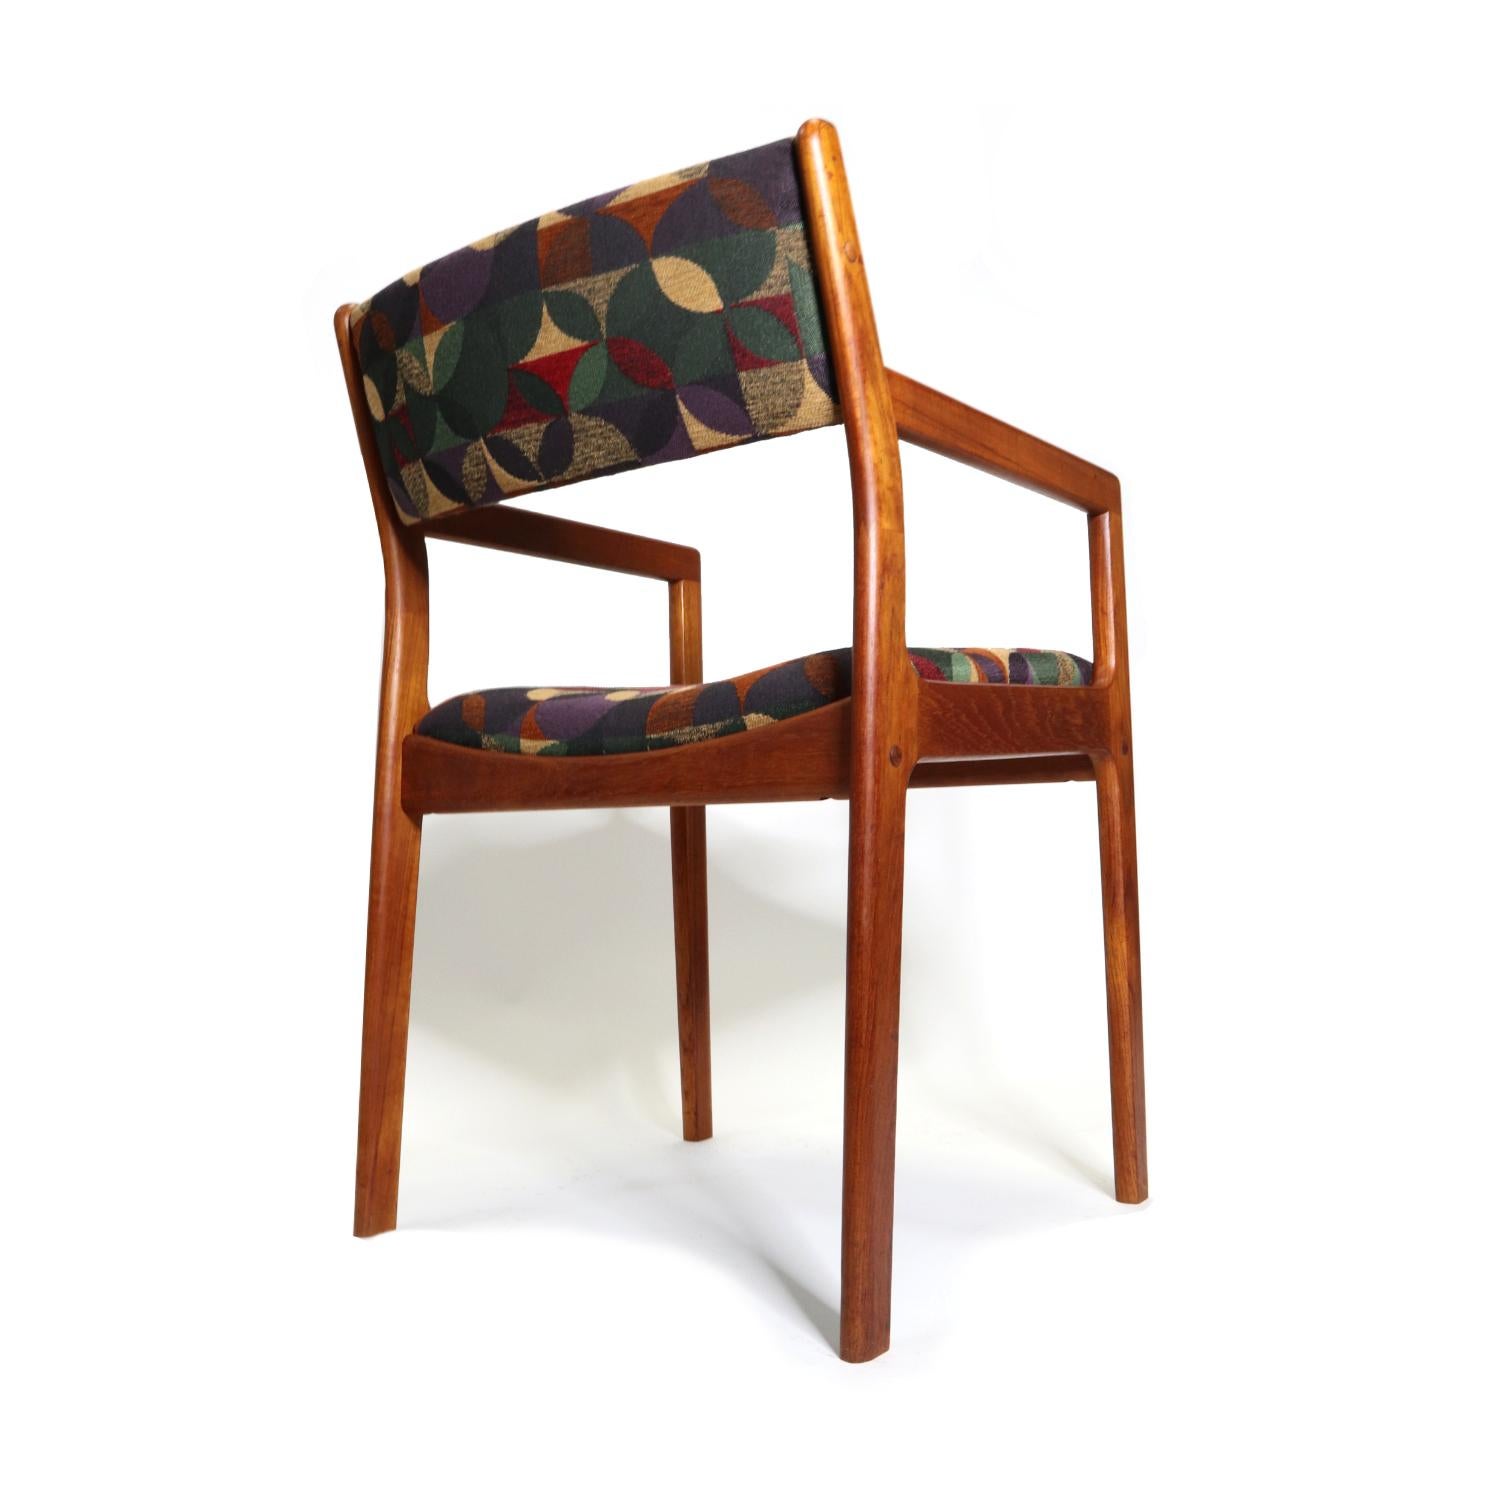 Set of six Danish teak dining chairs recently reupholstered in Knoll fabric. This set of six includes two arm chairs and four armless side chairs. The previous owner opted for luxurious Knoll textile in a novel multi-color pattern. The upholstery